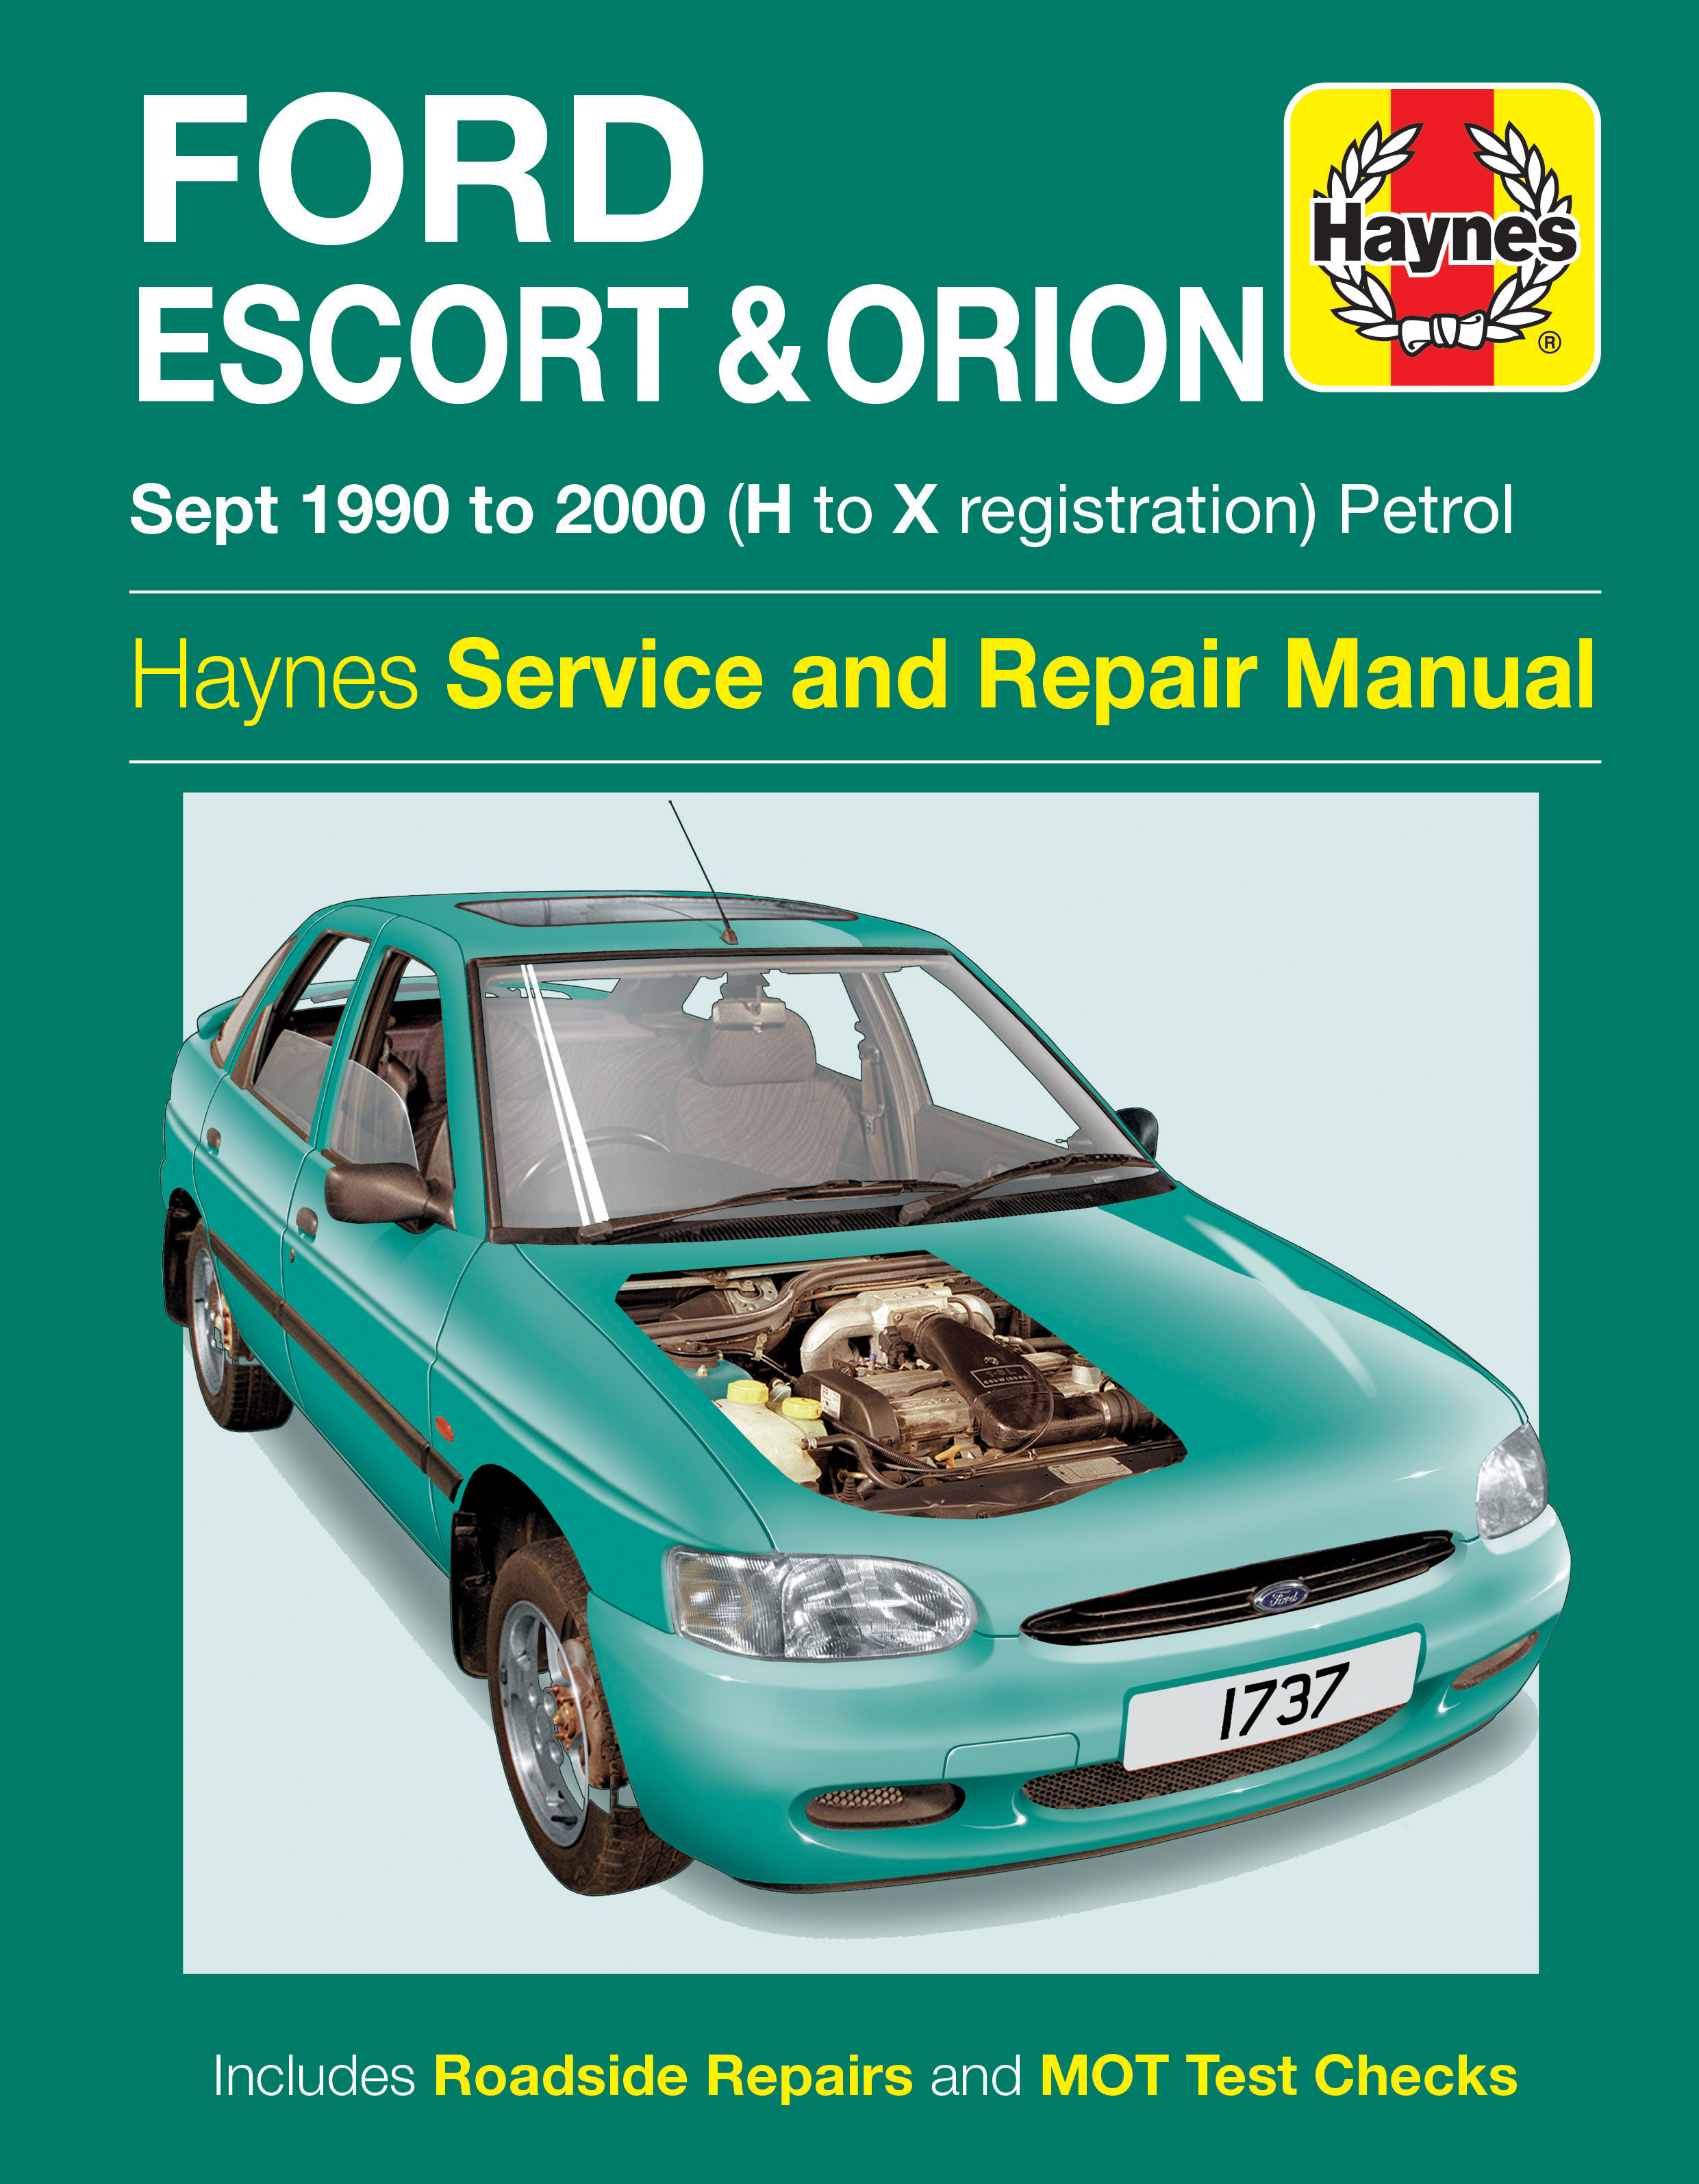 manual hayens free escort ford for